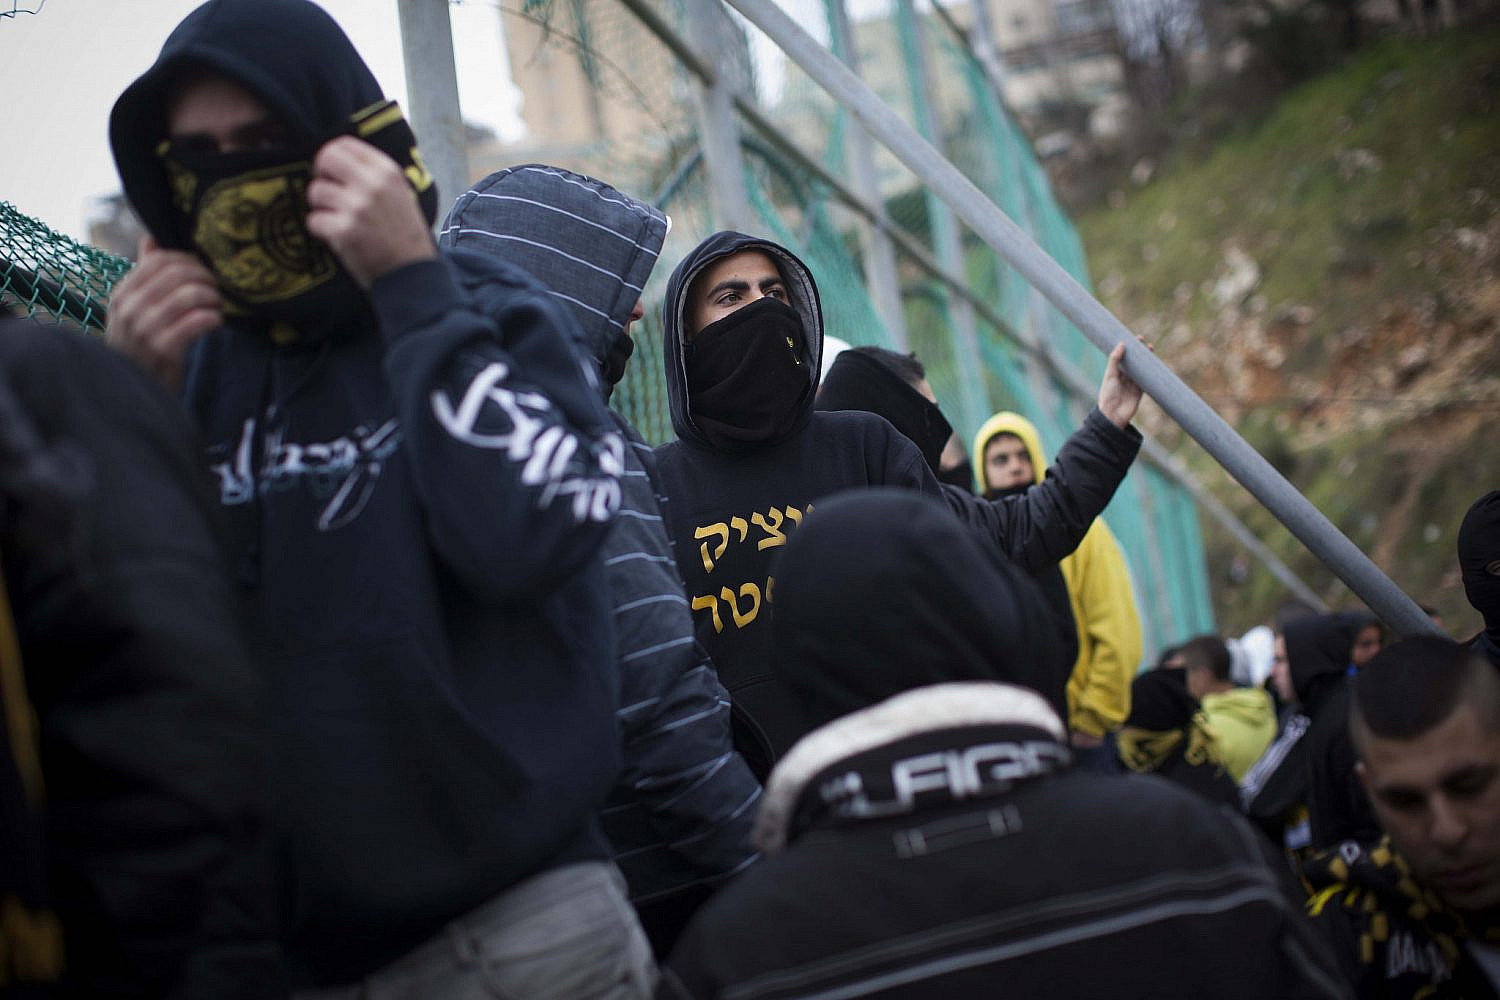 Fans of Beitar Jerusalem soccer club protest the decision to sign two Chechen Muslims players Zaur Sadayev and Gabriel Kadiev, during a training in Jerusalem on Feb. 1, 2013. (Yonatan Sindel/Flash90)